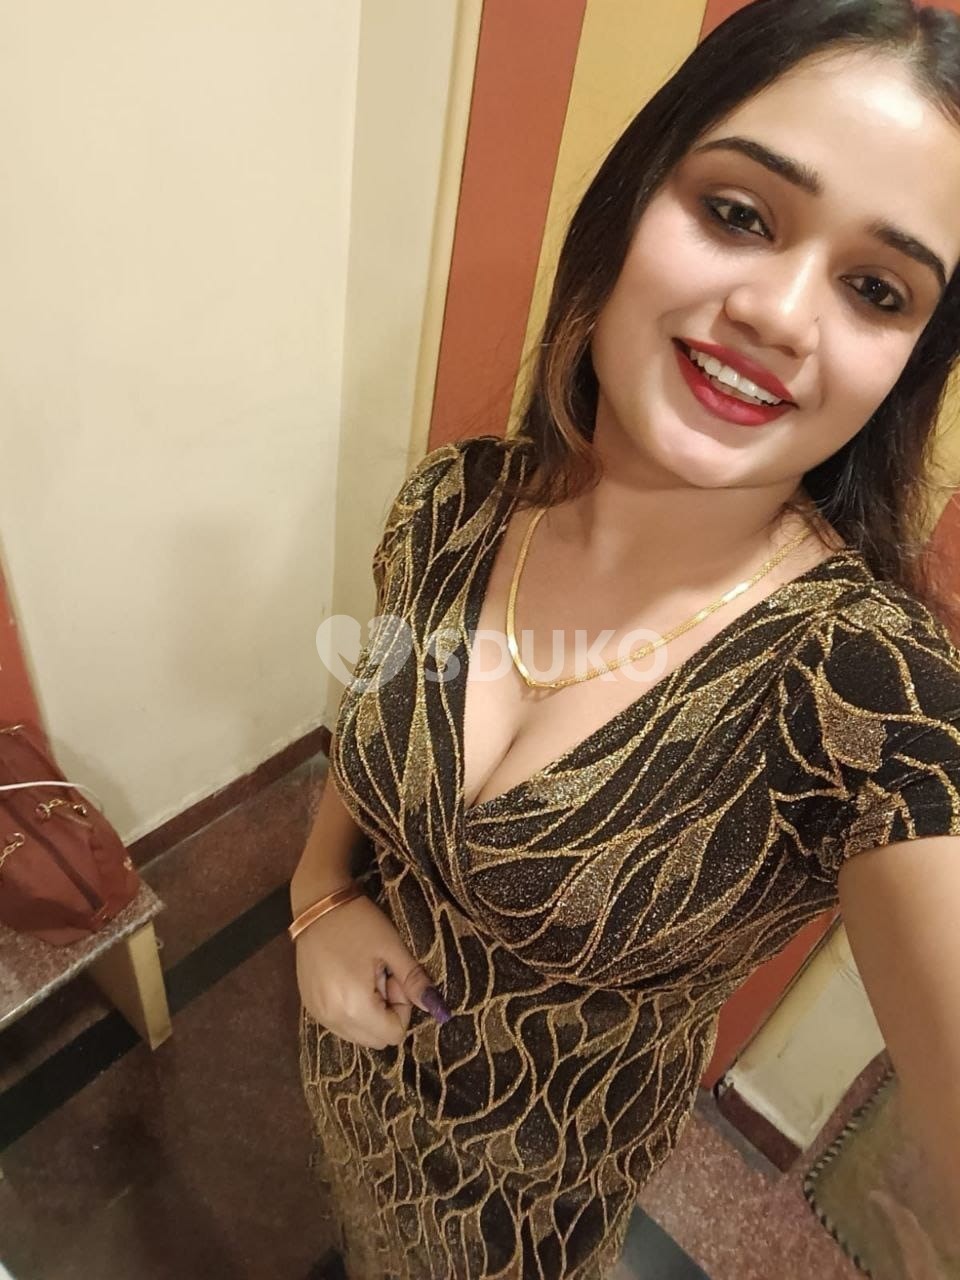 Silvassa City best call girl service available 24 hours full safe and secure